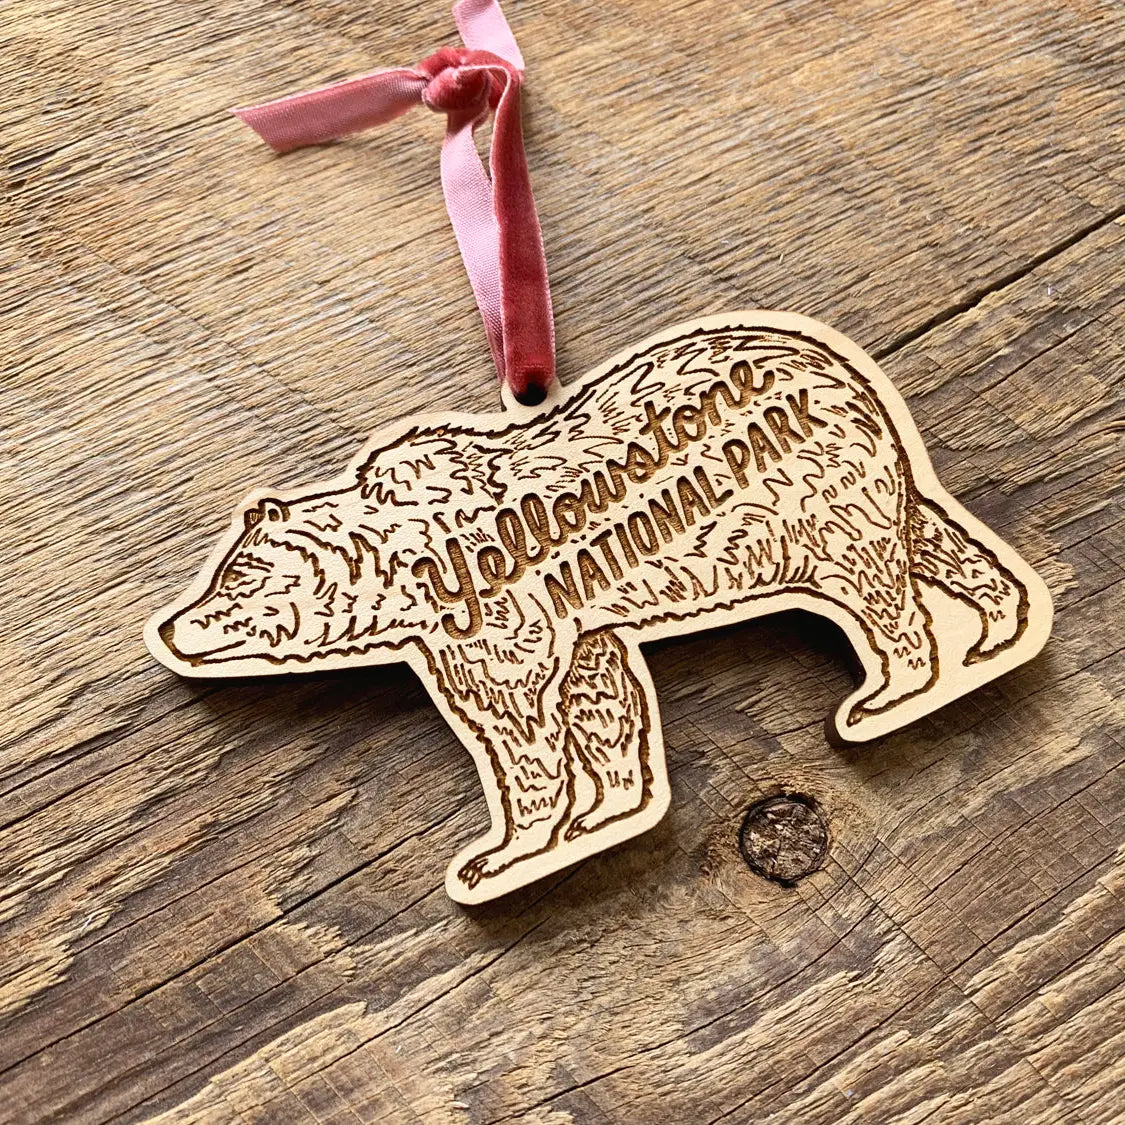 Yellowstone Grizzly Bear Ornament